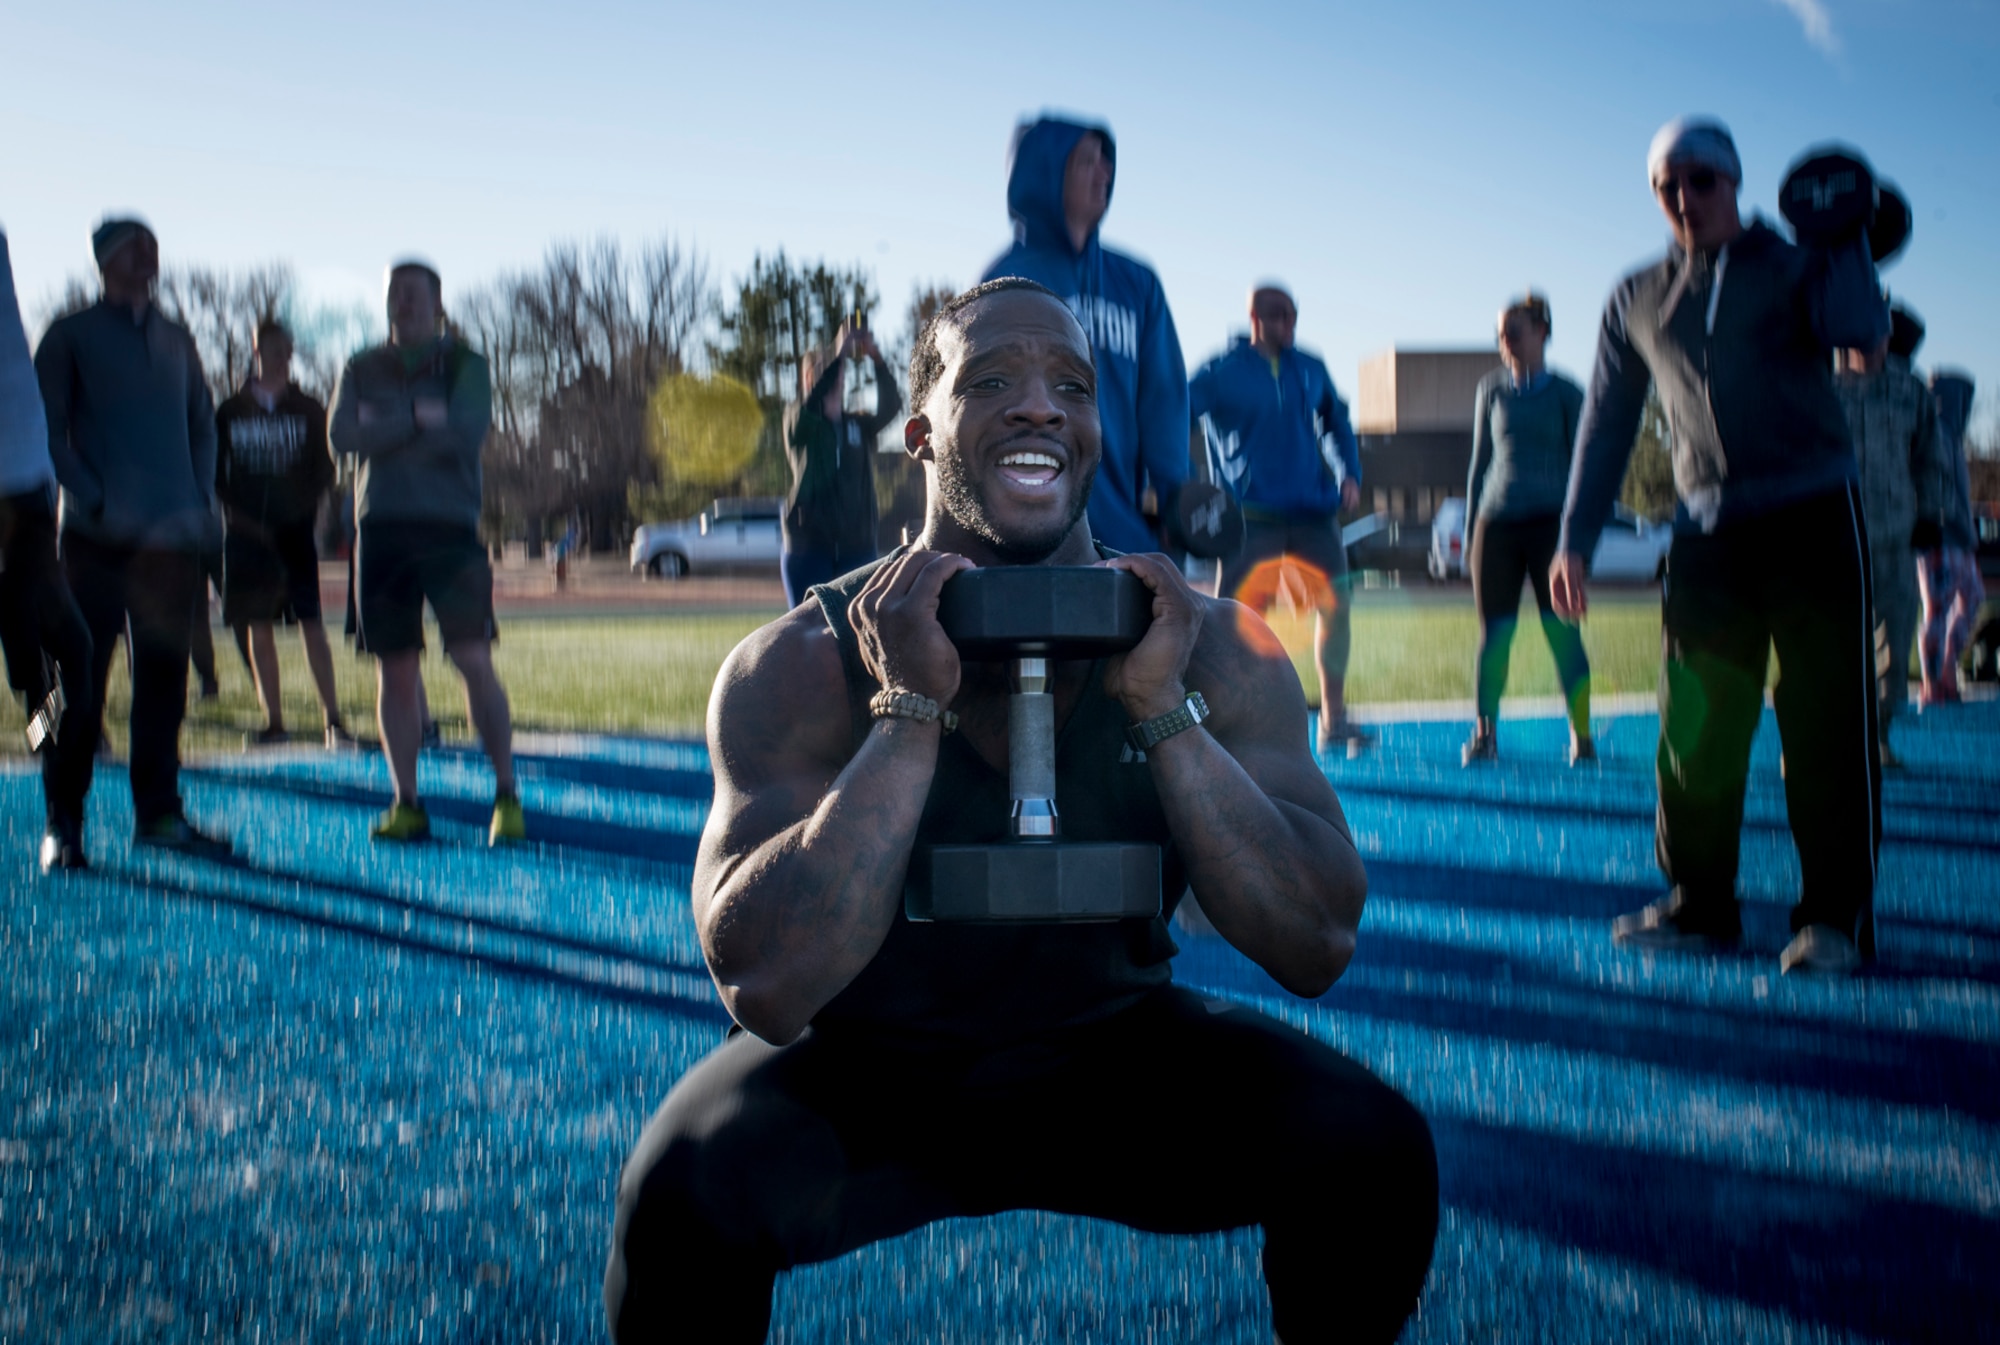 U.S. Air Force Staff Sgt. Maurice Hardy, 4th Space Control Squadron maintenance, works out in honor of Staff Sgt. Austin Bieren at Peterson Air Force Base, Colo., March 28, 2018. The workout was inspired by Bieren’s workouts and to honor and commemorate his death, which occurred March 28, 2017. (U.S. Air Force photo by Senior Airman Dennis Hoffman)